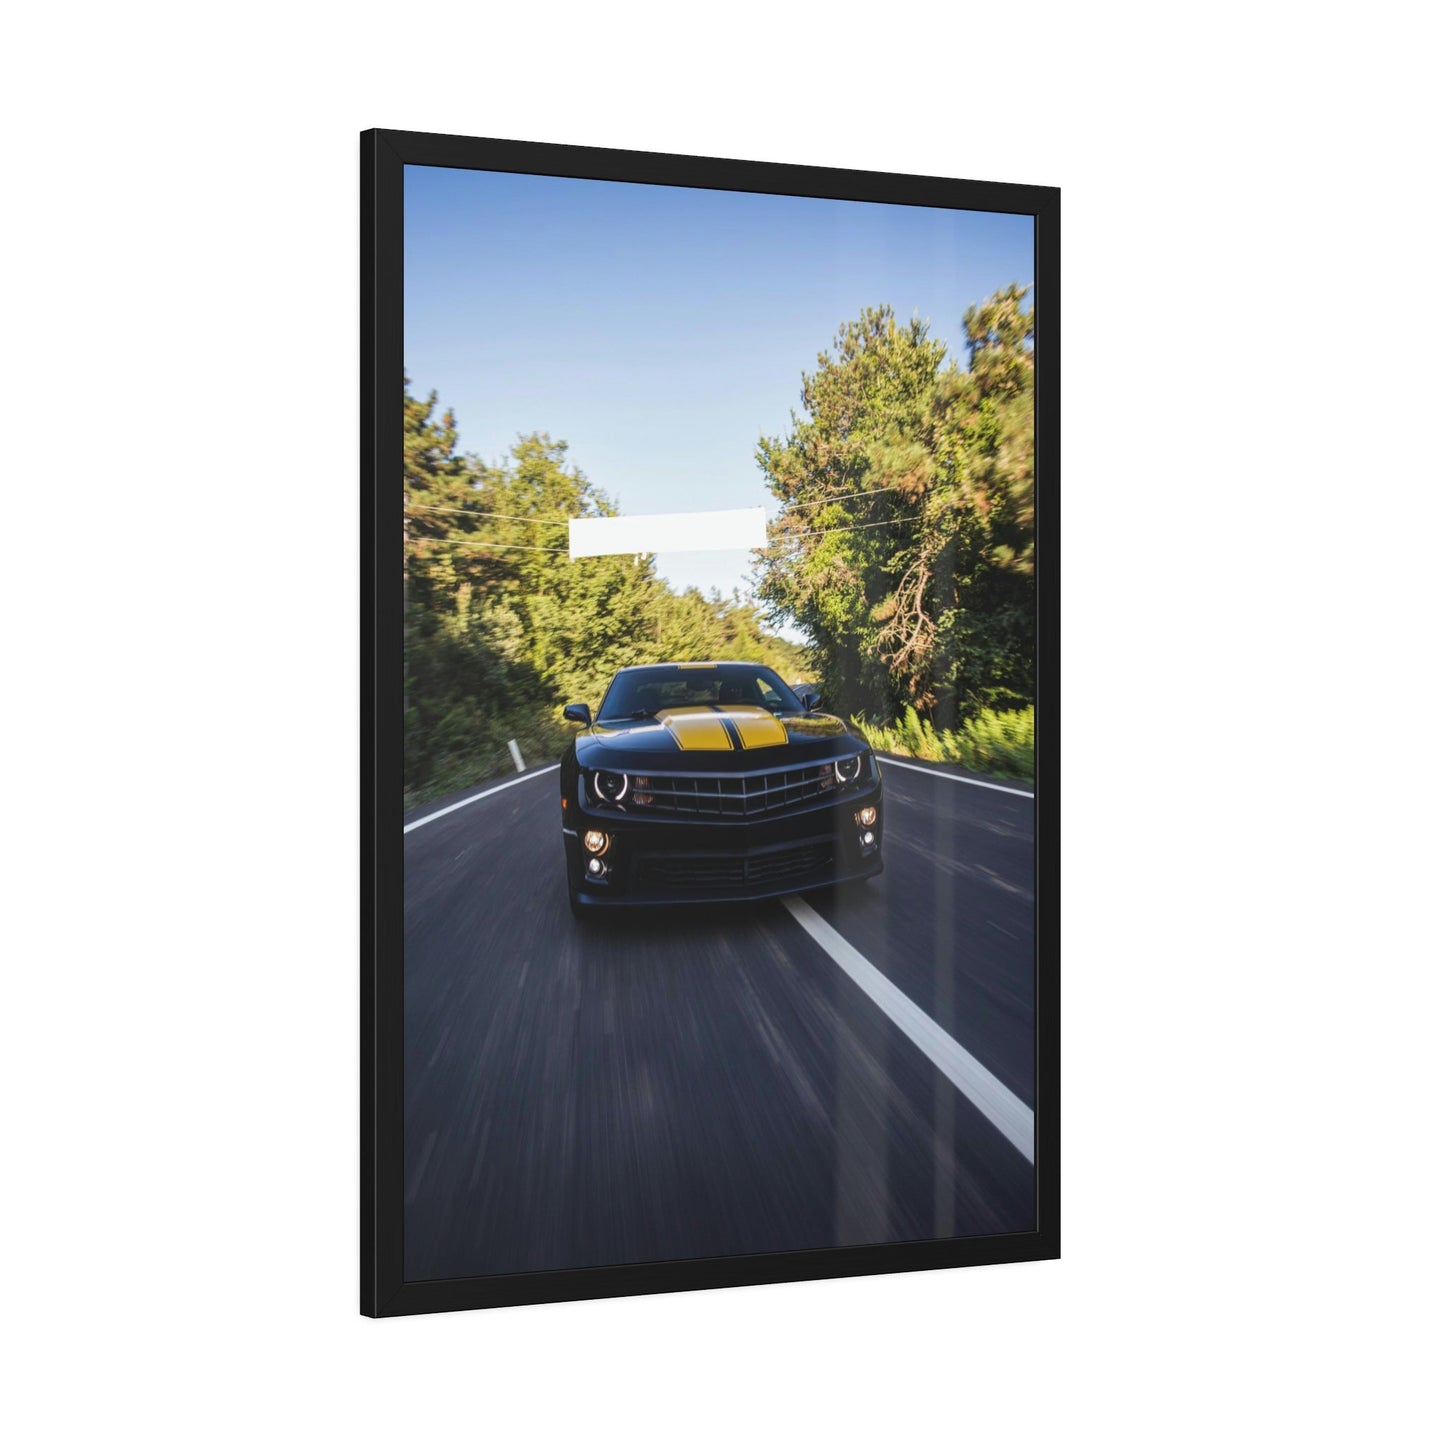 Rev Up Your Walls: Camaro Art on Framed Canvas and Posters